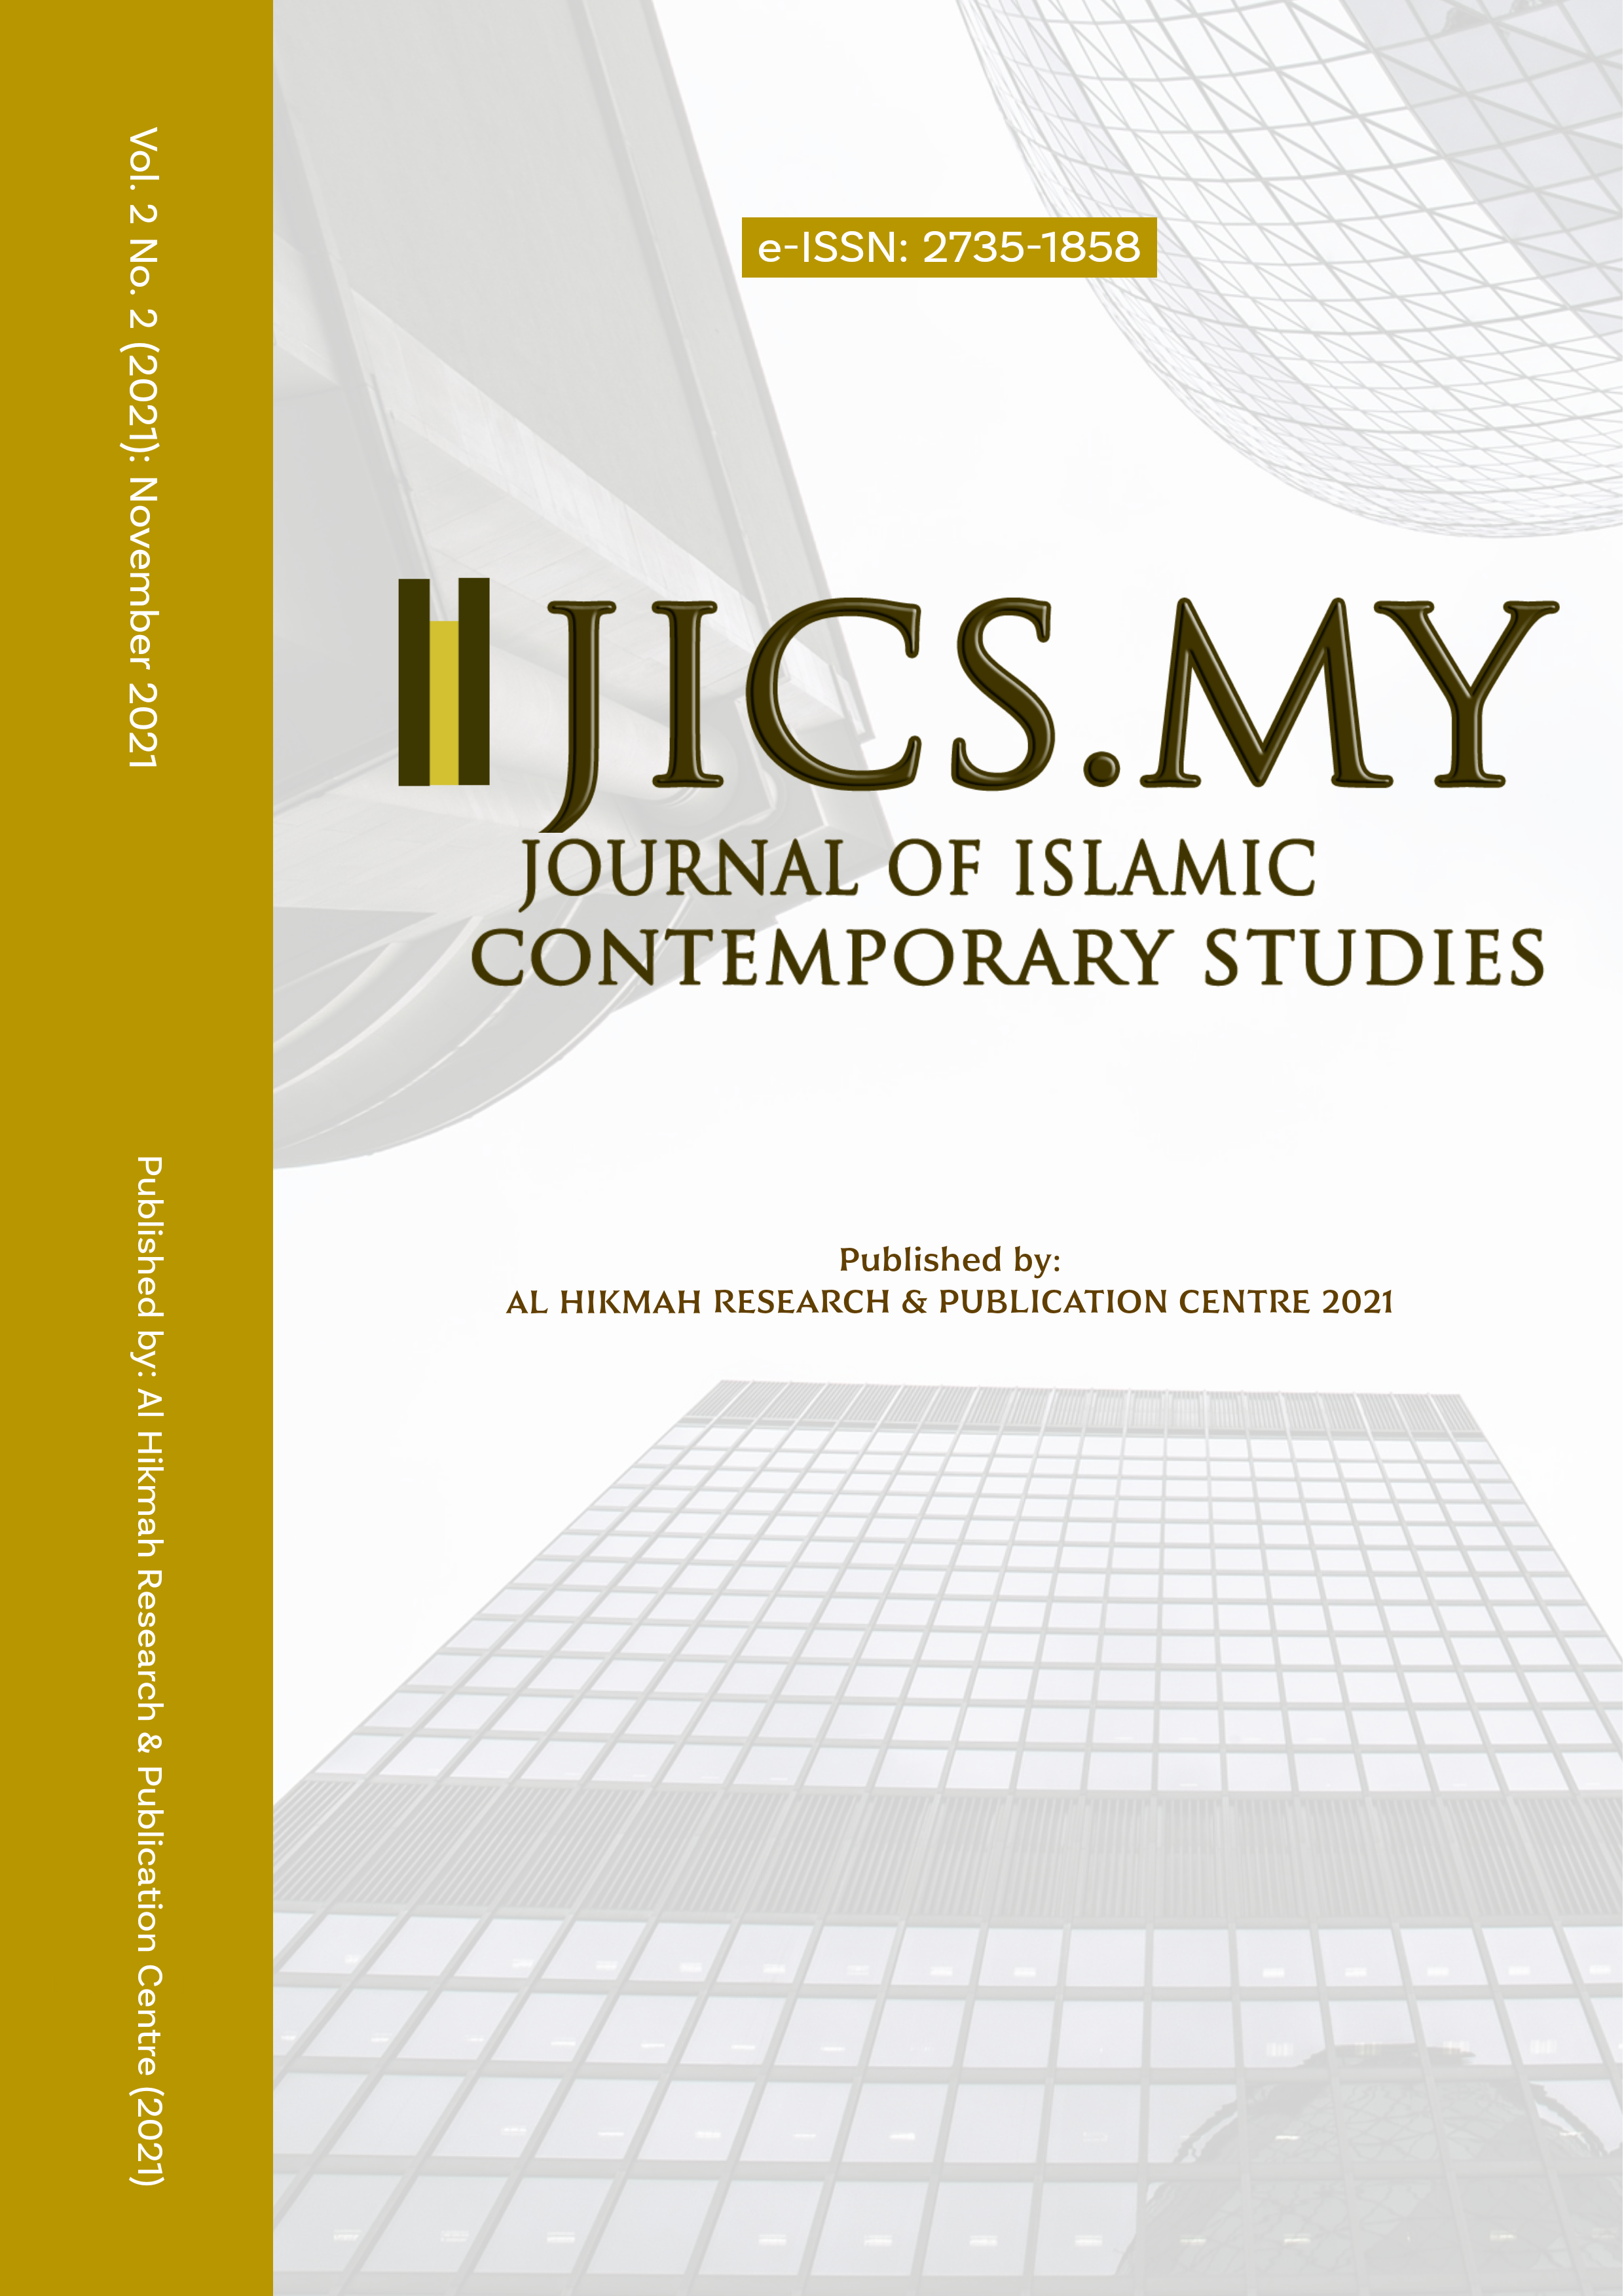 Journal of Islamic Studies carries out genuine scientific articles and journal which have never been published before.